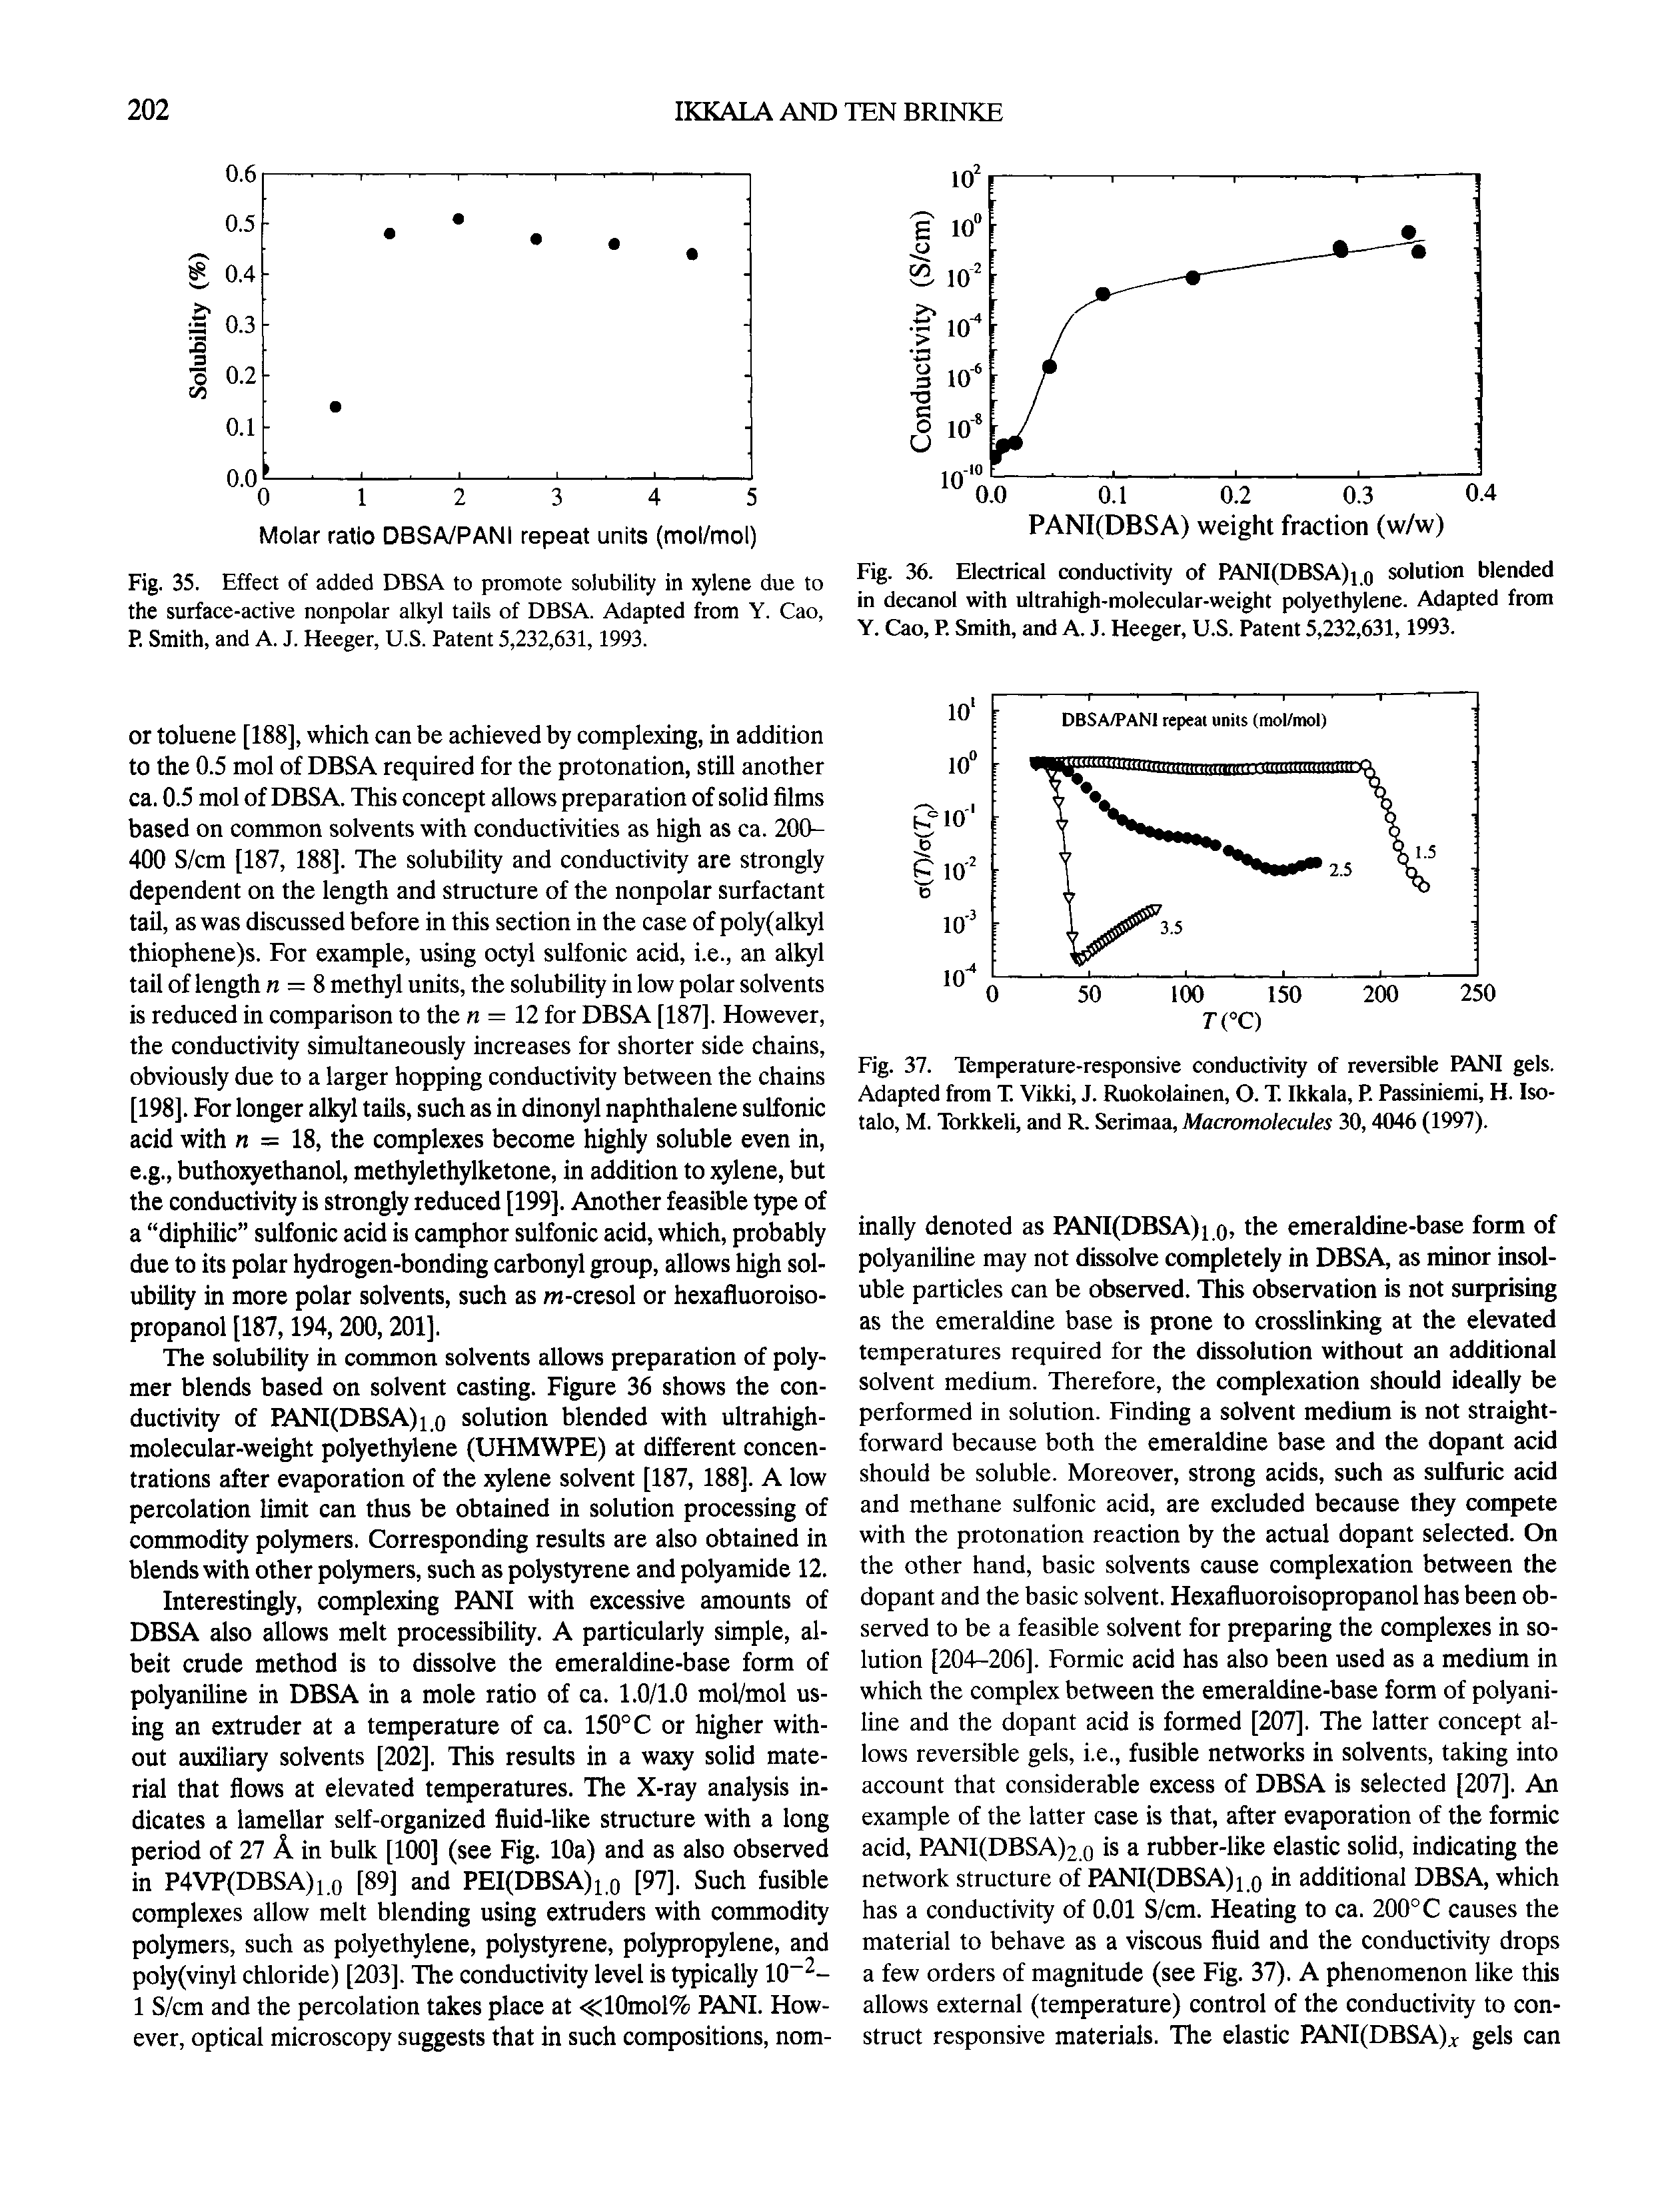 Fig. 36. Electrical conductivity of PANI(DBSA)i q solution blended in decanol with ultrahigh-molecular-weight polyethylene. Adapted from Y. Cao, P. Smith, and A. J. Heeger, U.S. Patent 5,232,631,1993.